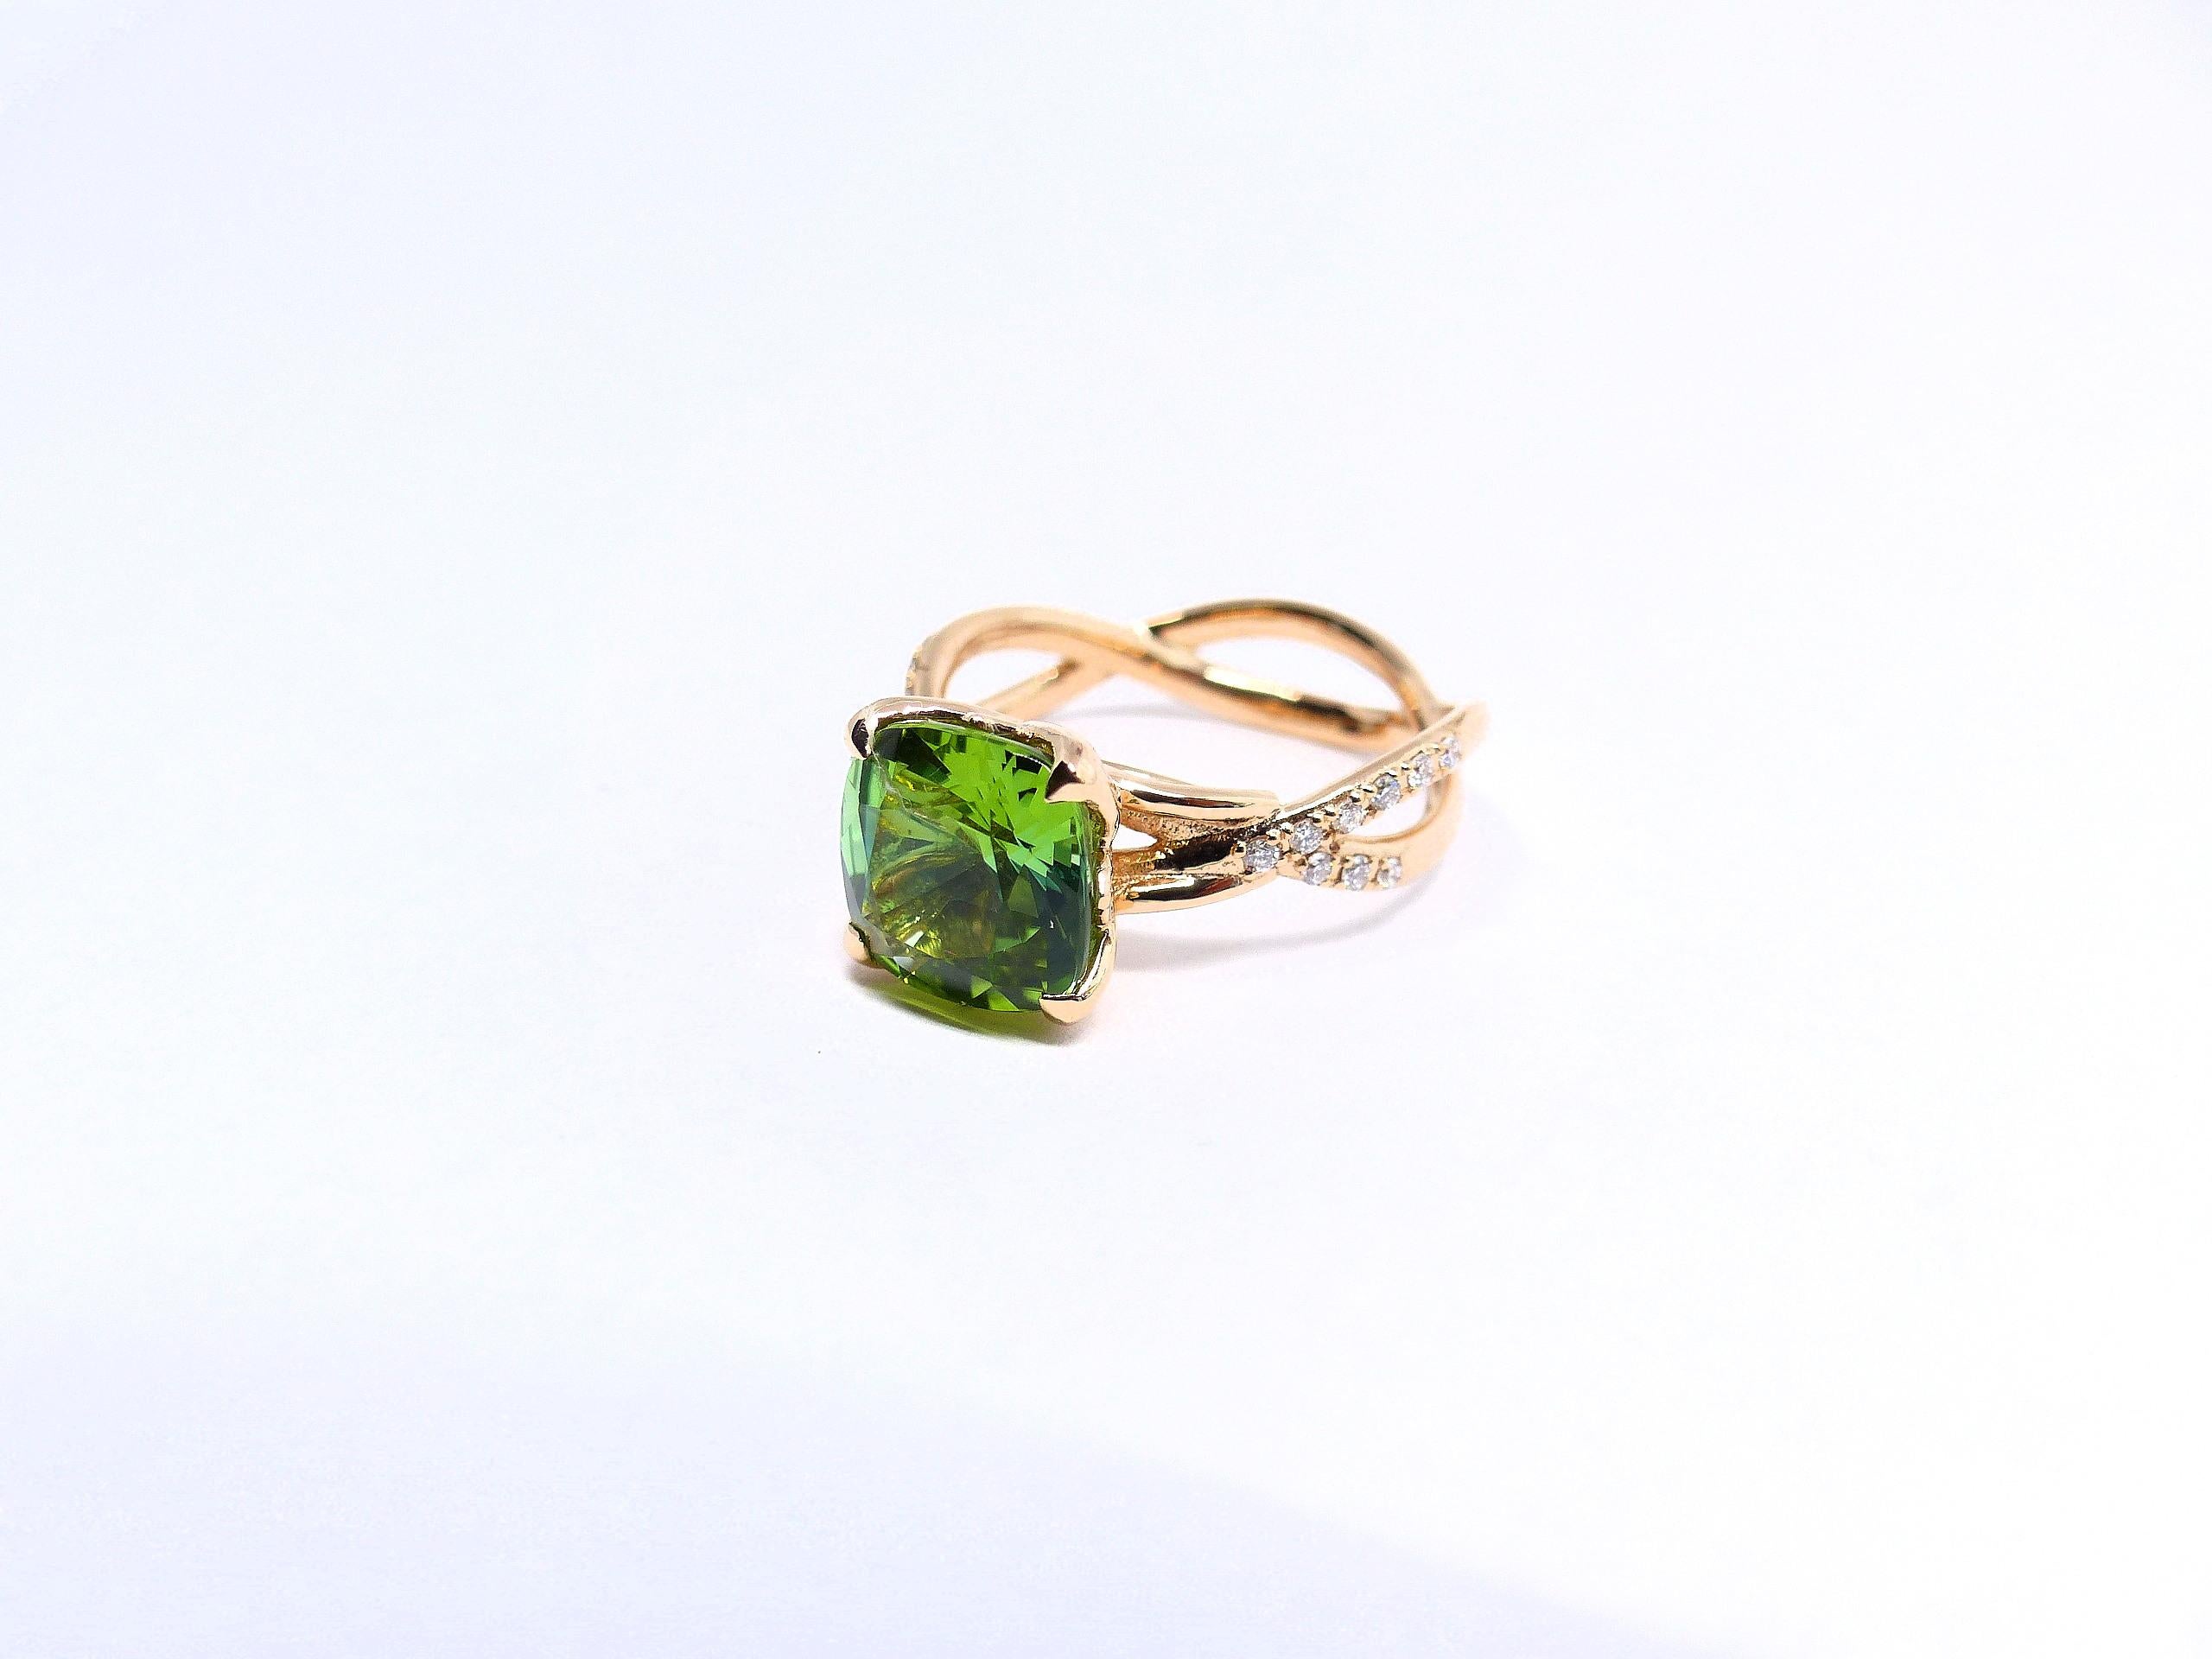 Thomas Leyser is renowned for his contemporary jewellery designs utilizing fine gemstones.

This 18k red gold ring (5.04g) is set with 1 fine Tourmaline in magnificient greenish colour and large facettes (cushion cut, 9x9mm, 2.94 carat) and